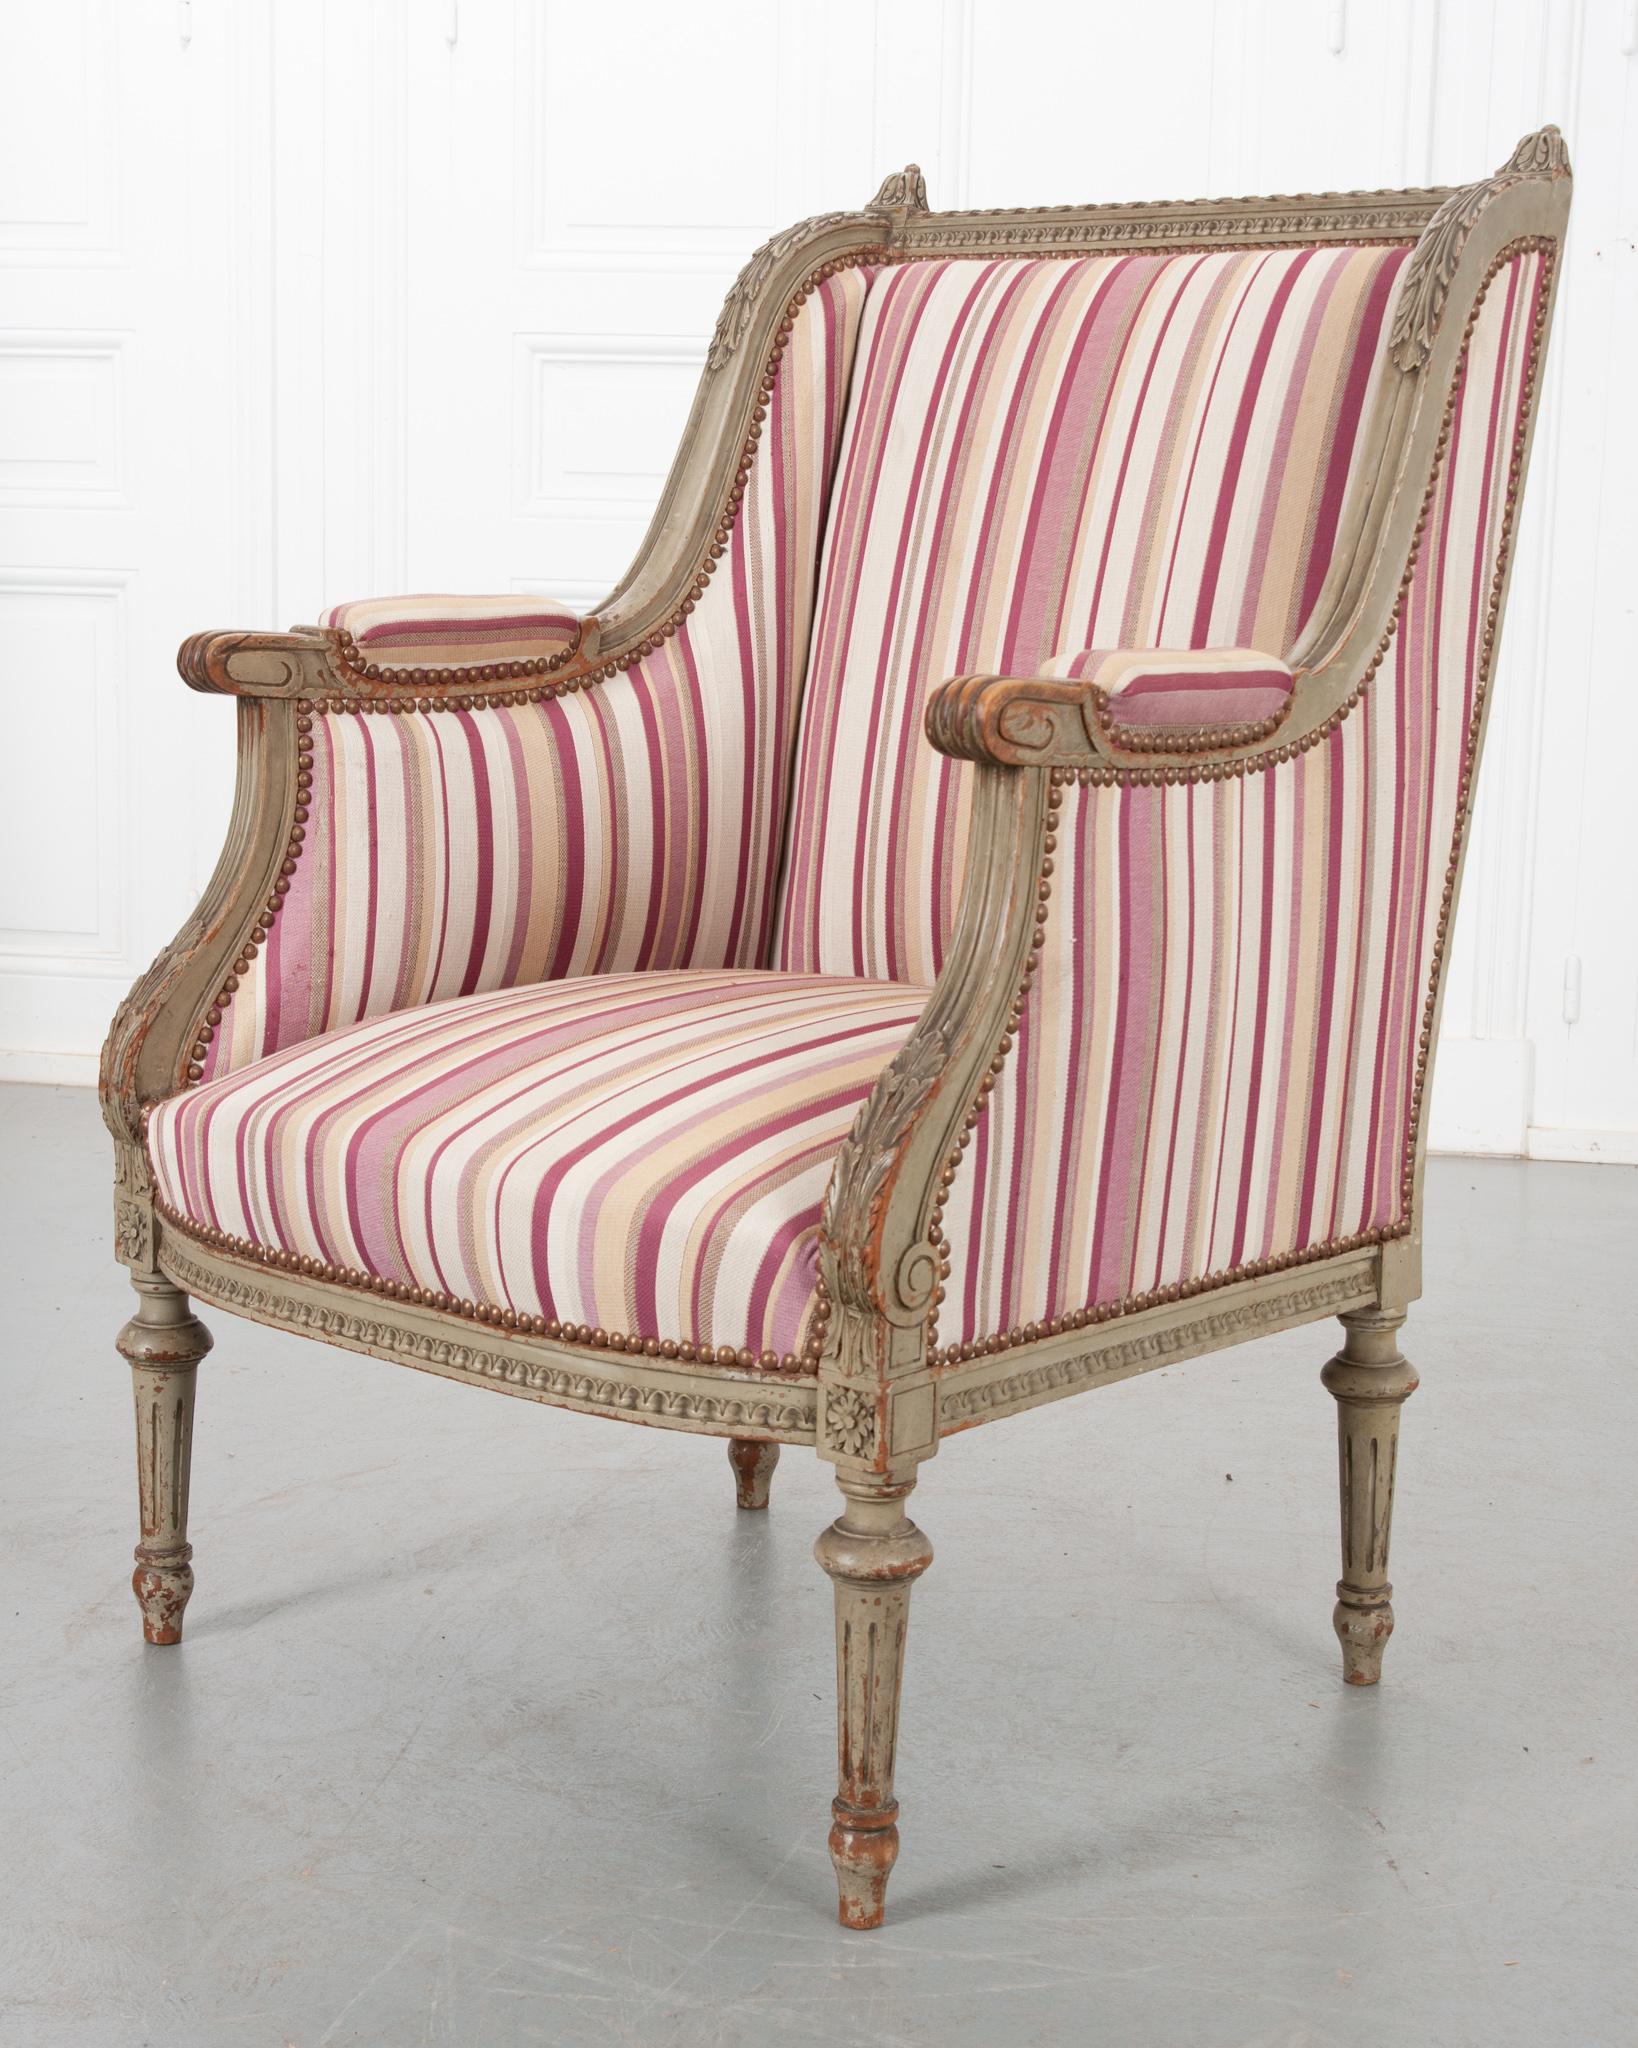 A fabulous individual Louis XVI style bergere from 19th century France. This antique armchair boasts a meticulously carved and painted frame to which a lovely striped fabric has been affixed. The squared frame is ornamented with carved acanthus